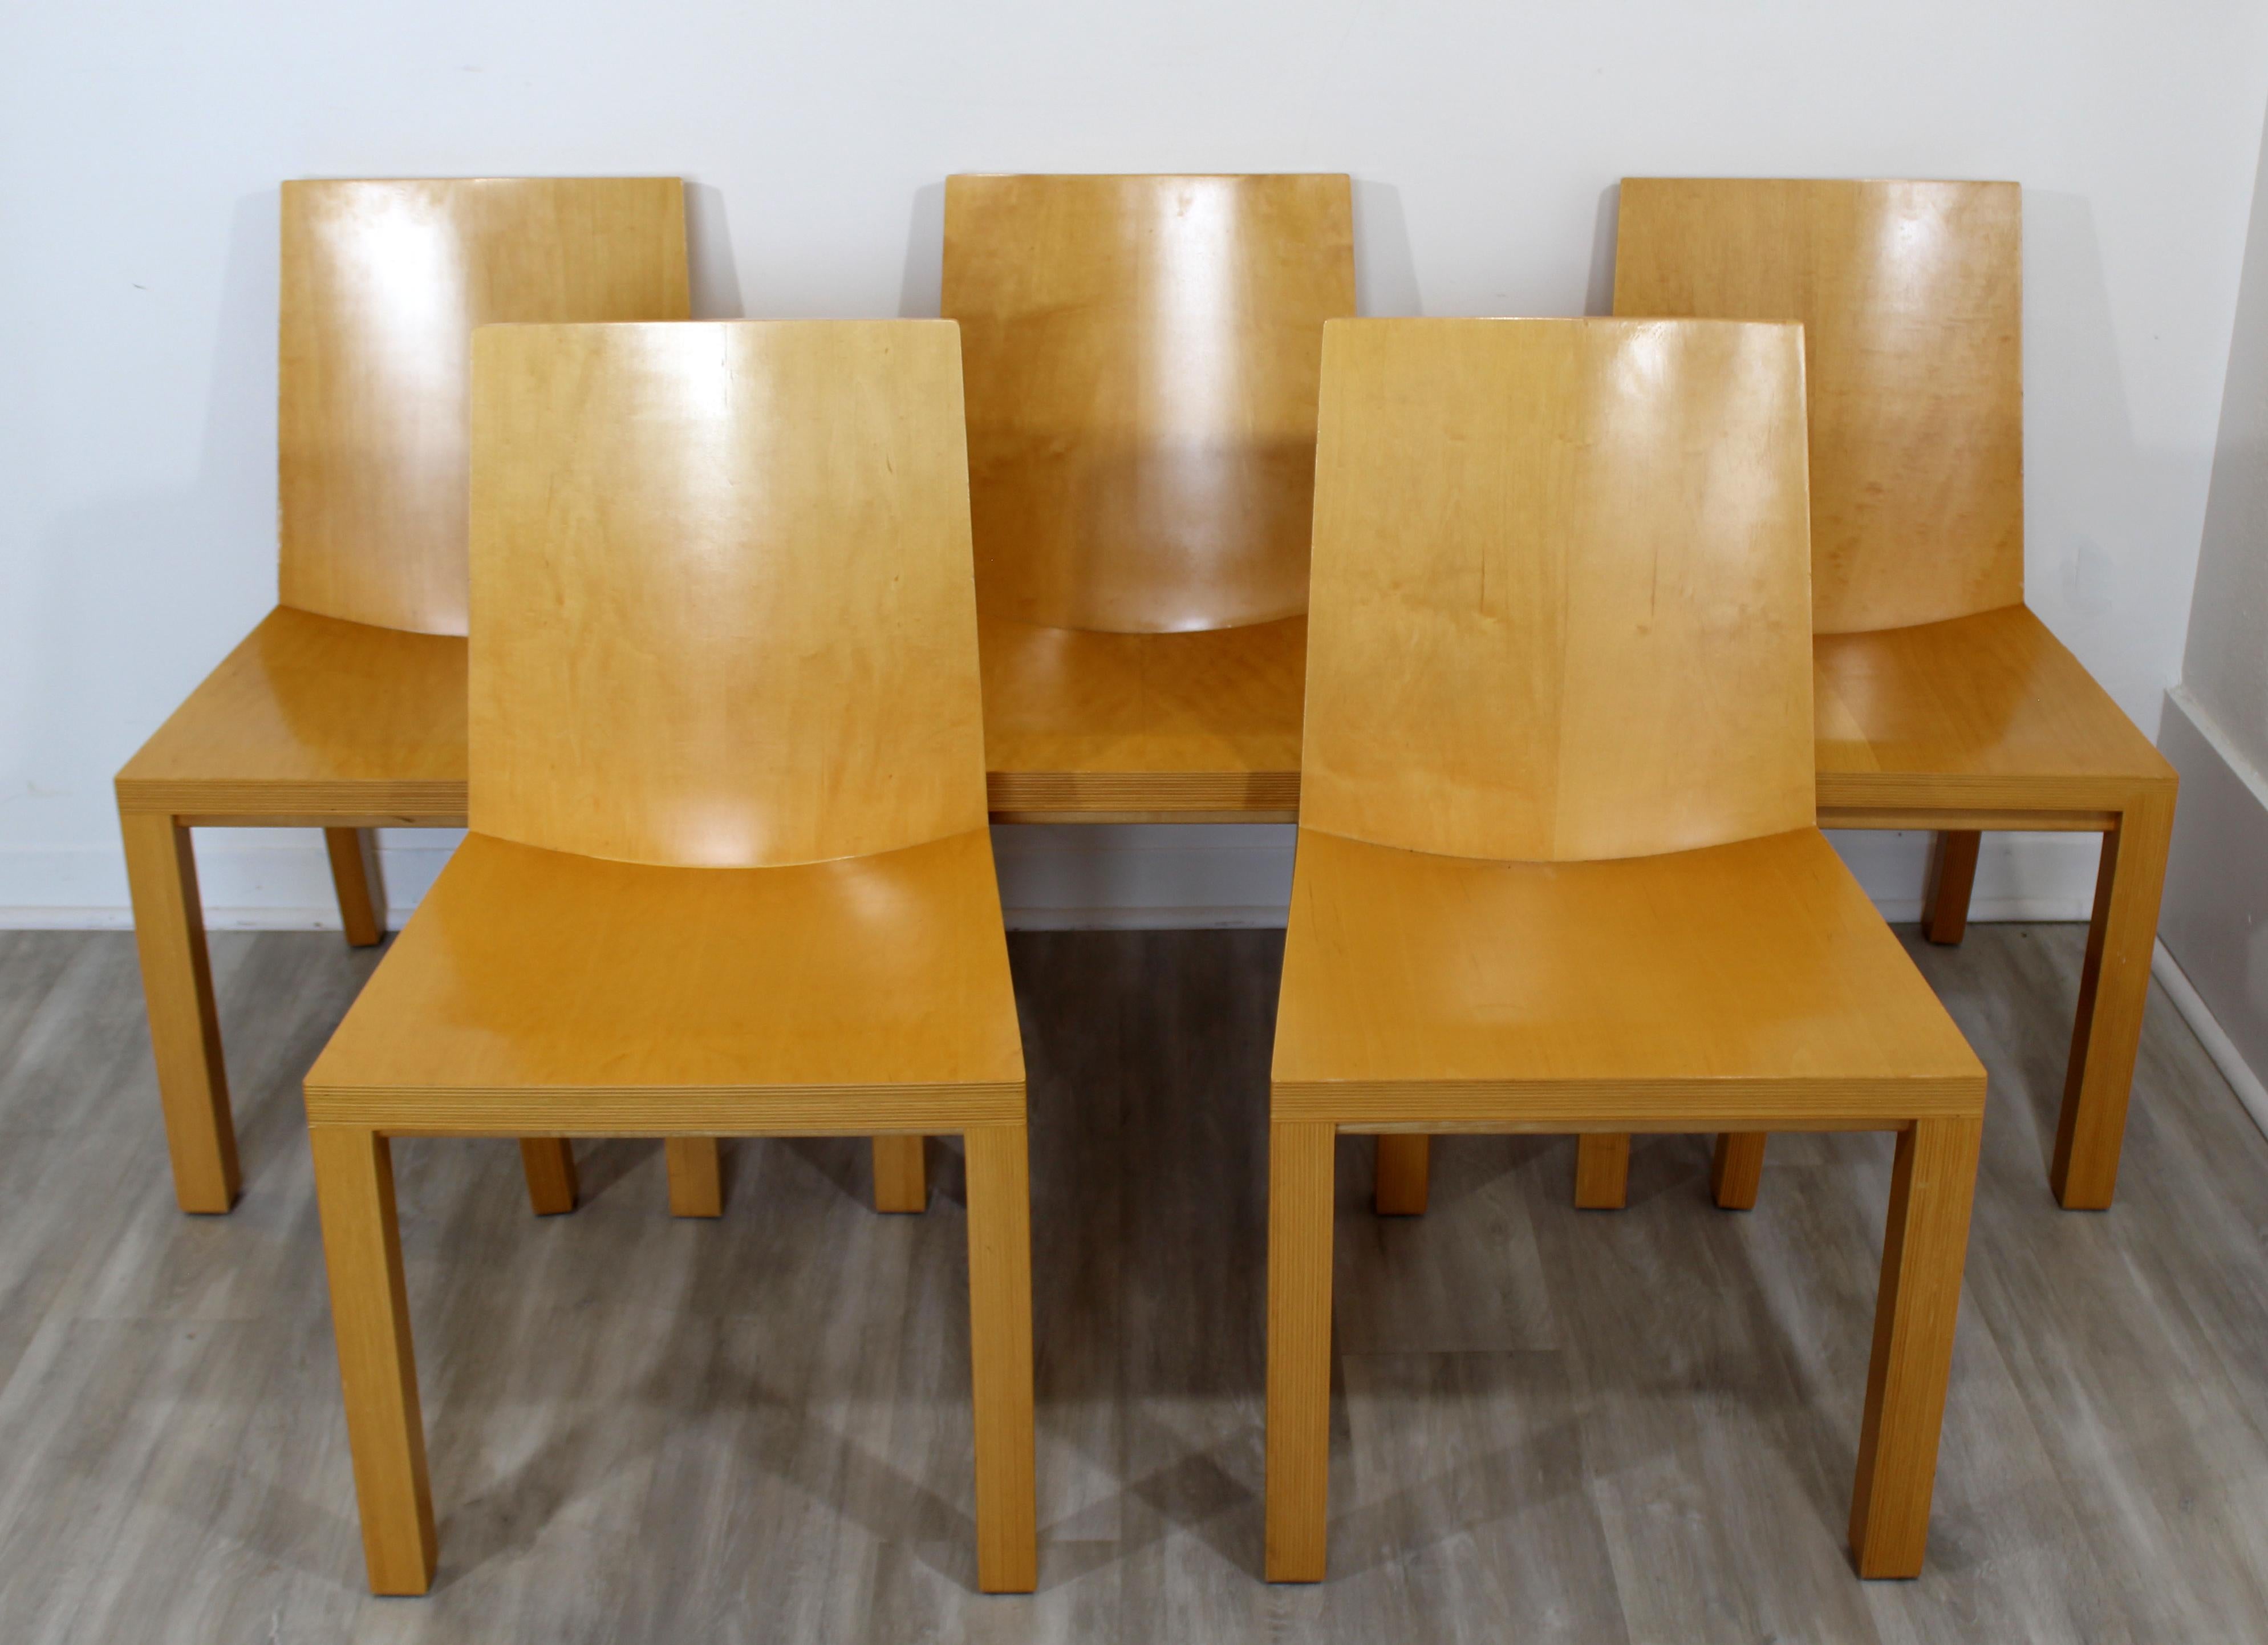 For your consideration is a phenomenal set of five, lacquered maple side chairs, by Dakota Jackson. In very good condition, with some chips that are pictured. The dimensions are 20